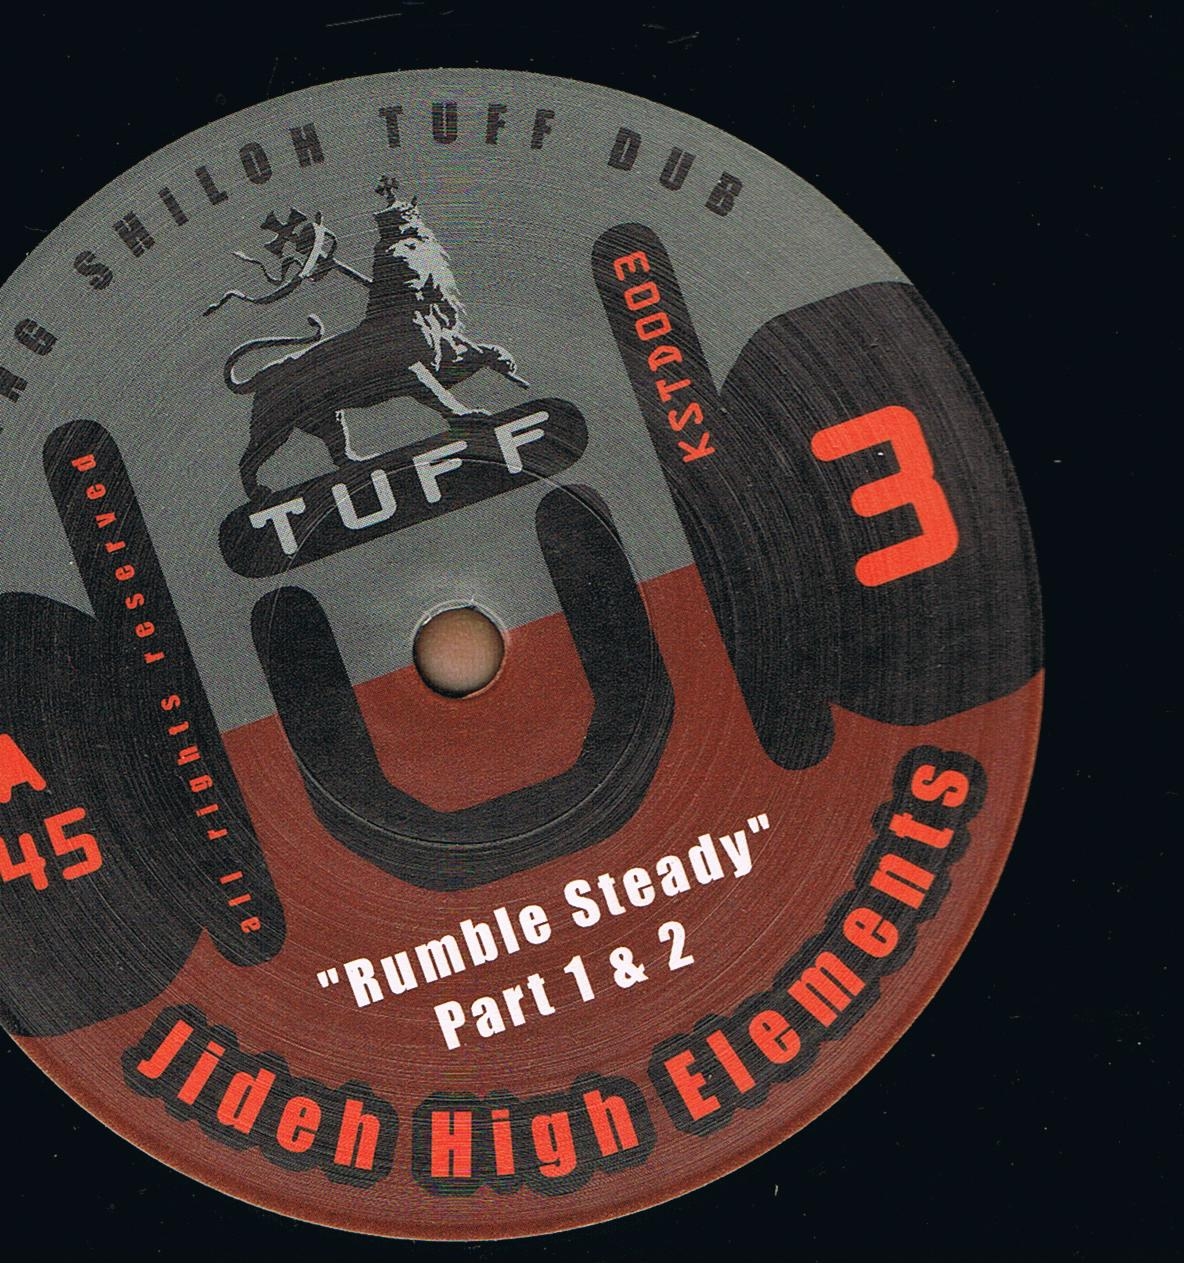 Jideh High Elements - Rumble Steady / Imperial Sound Army - Zion Ites (12")